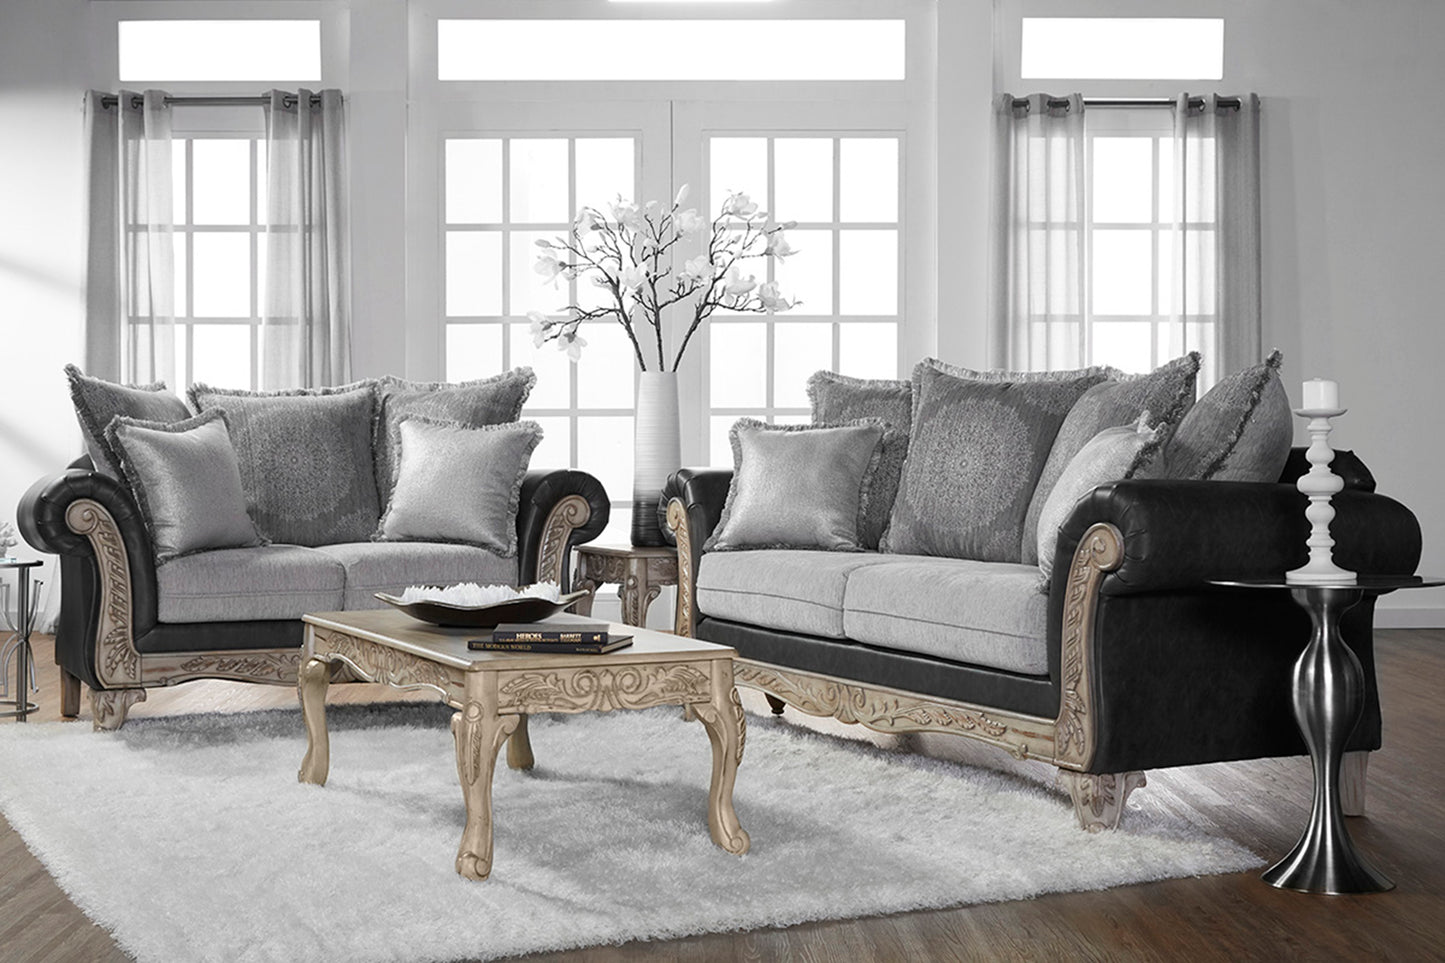 San Marino 2-Tone Fabric Wooden Frame Living Room Collection, Gray